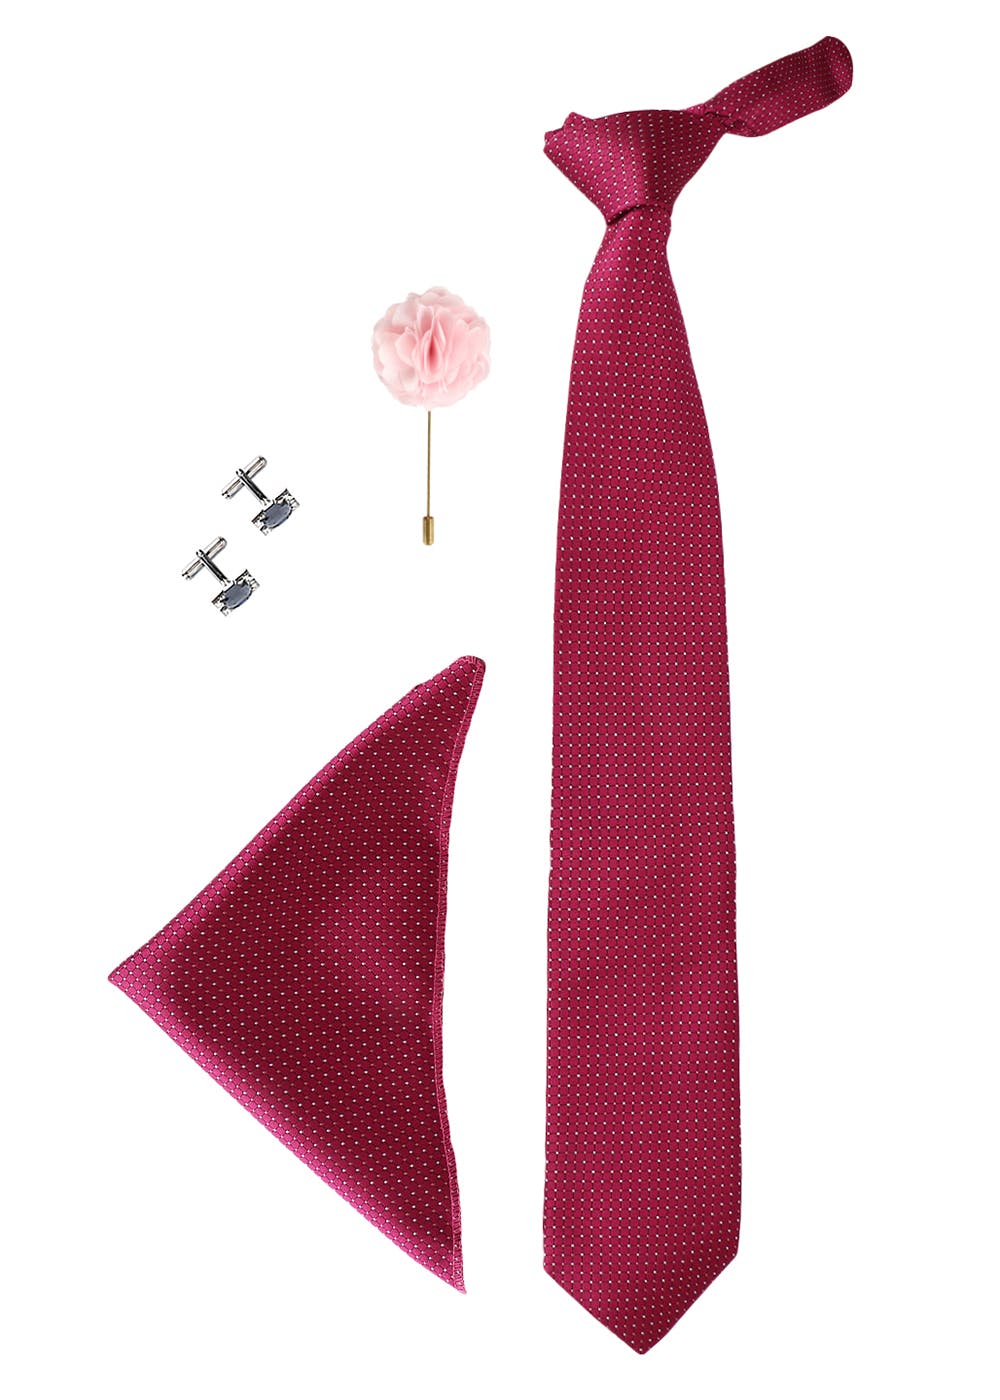 Dubulle Bow Tie and Lapel pin Set with Pocket Square Cufflinks 